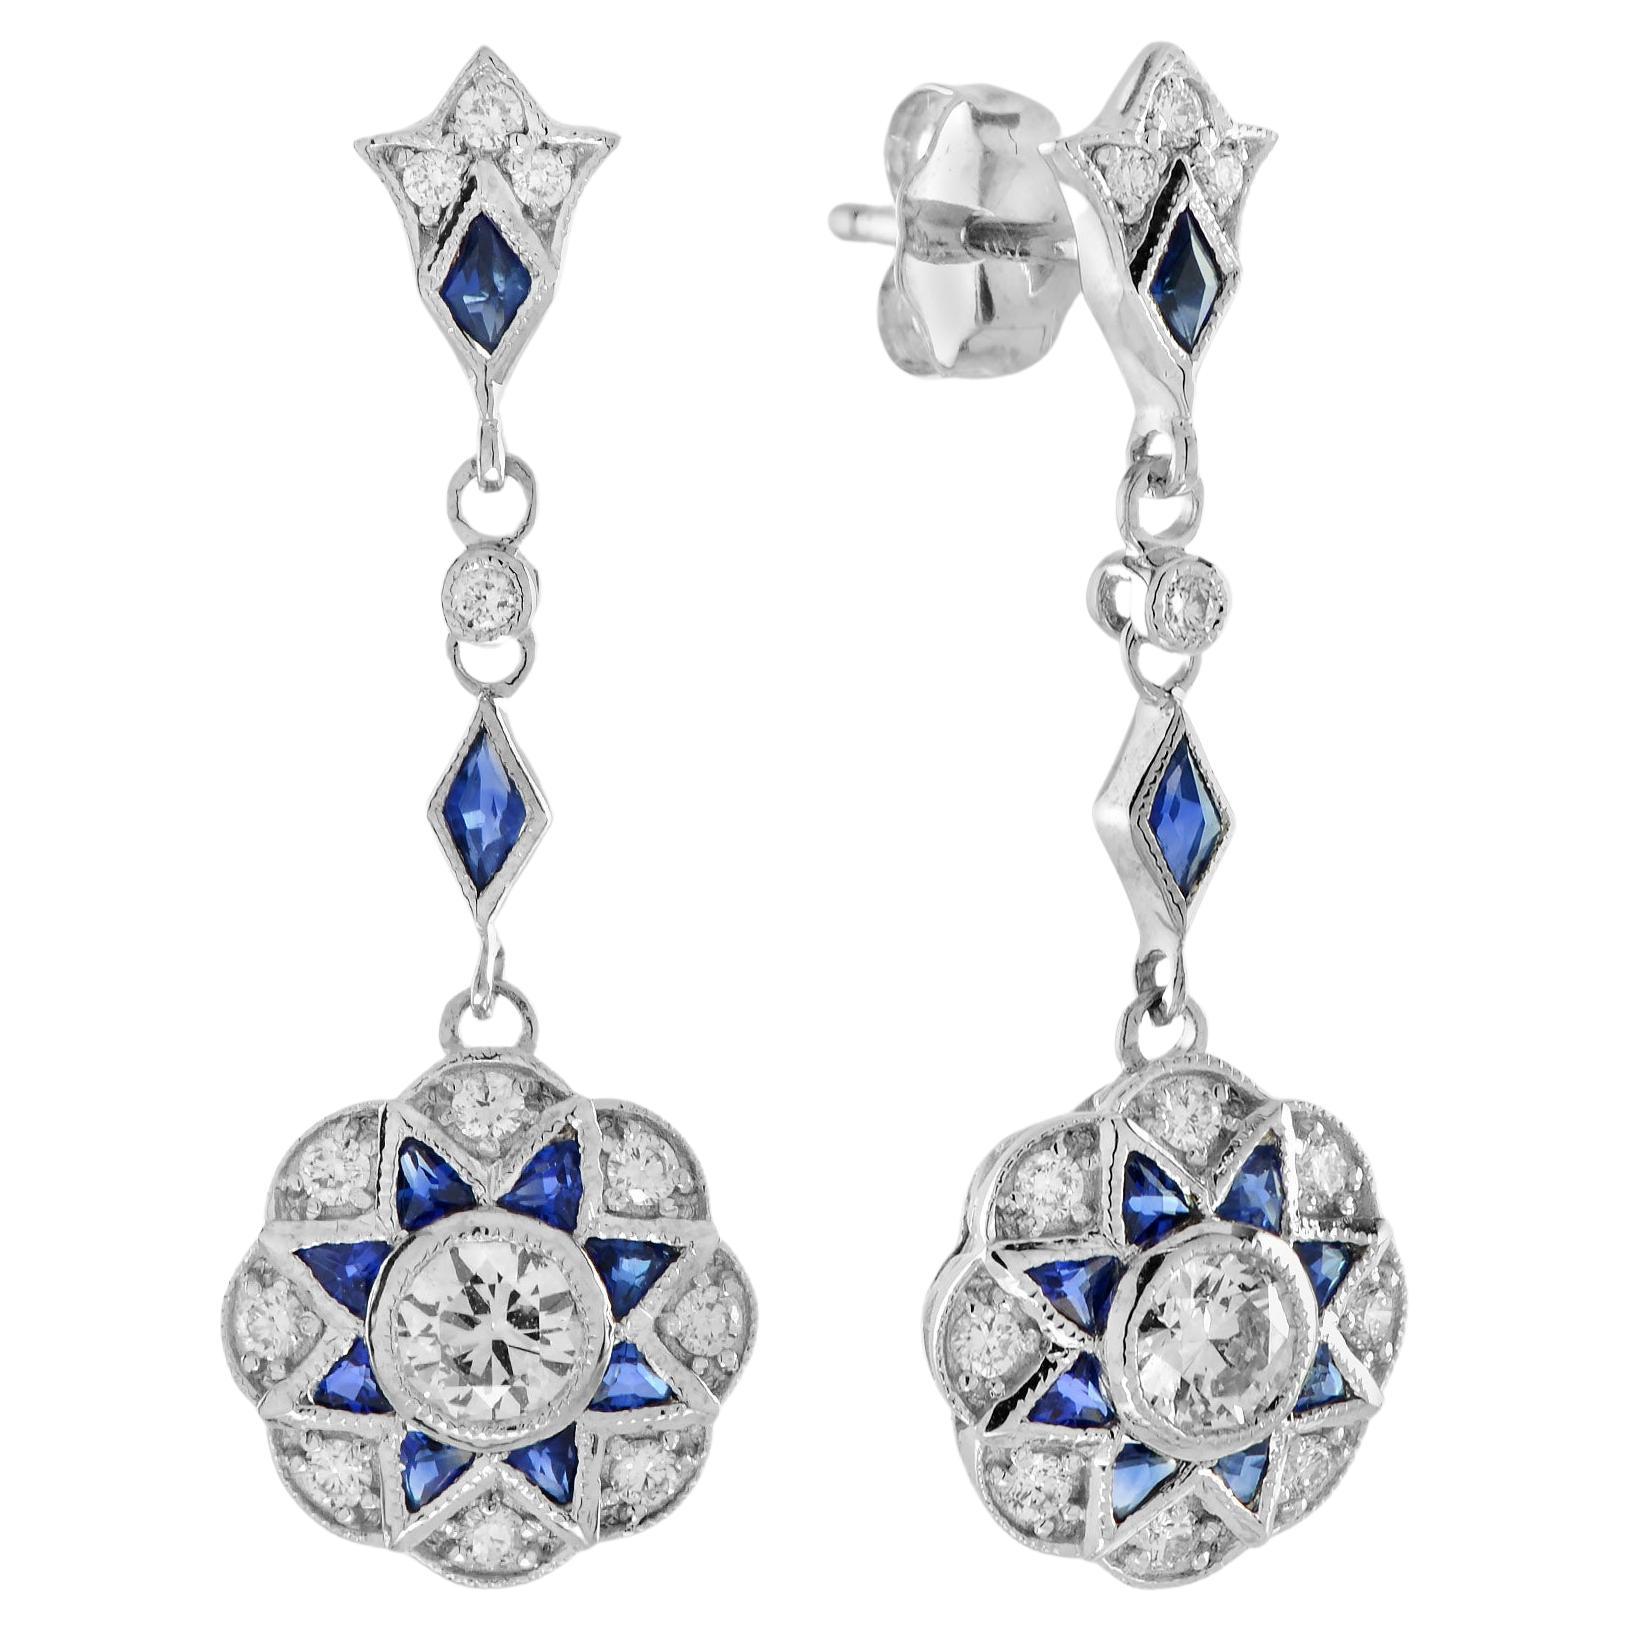 Diamond and Sapphire Art Deco Style Floral Dangle Earrings in 18k White Gold